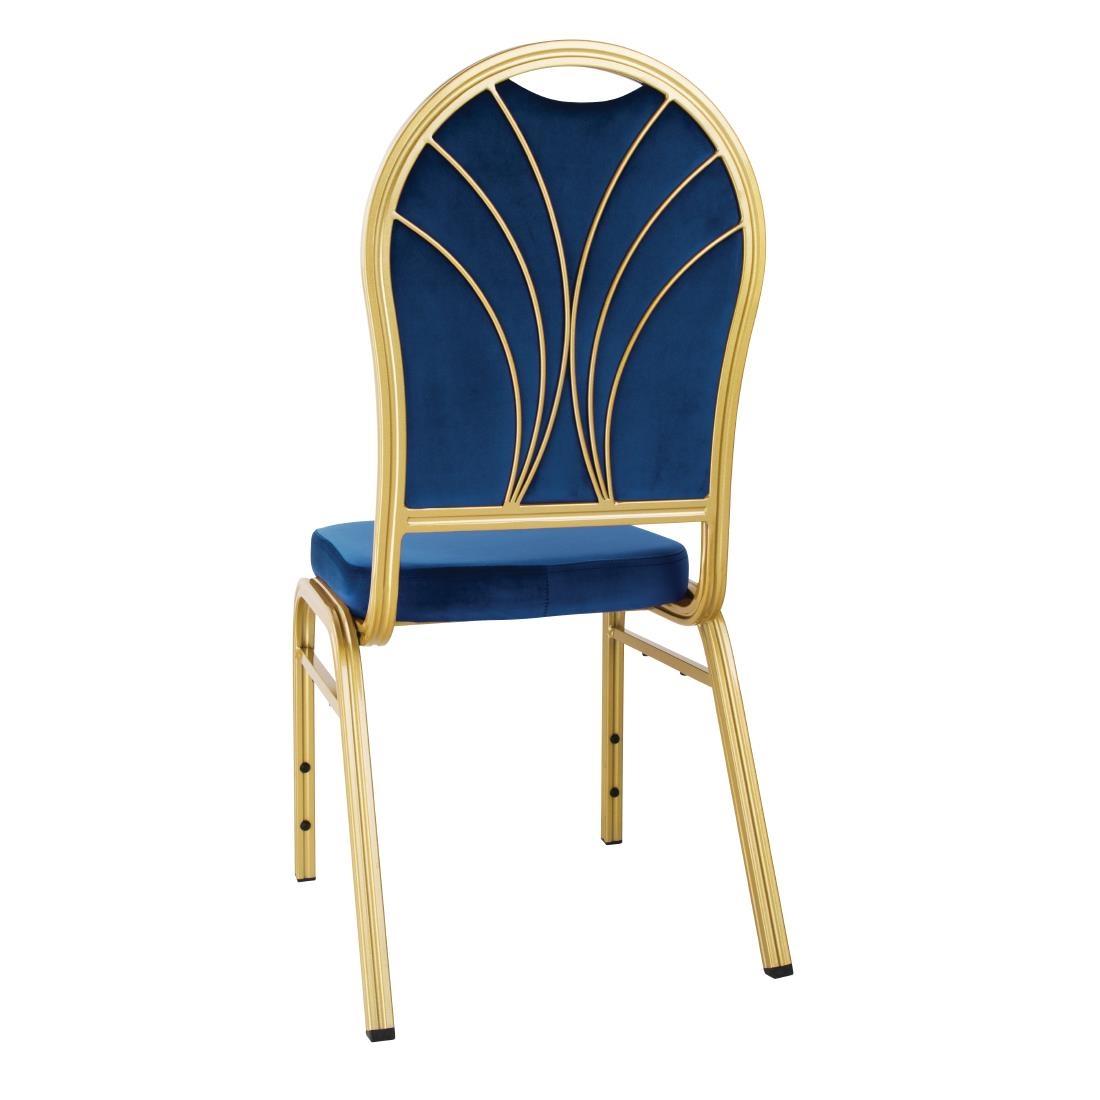 Bolero Regal Banquet Chairs Sapphire (Pack of 4) - DY696  - 3